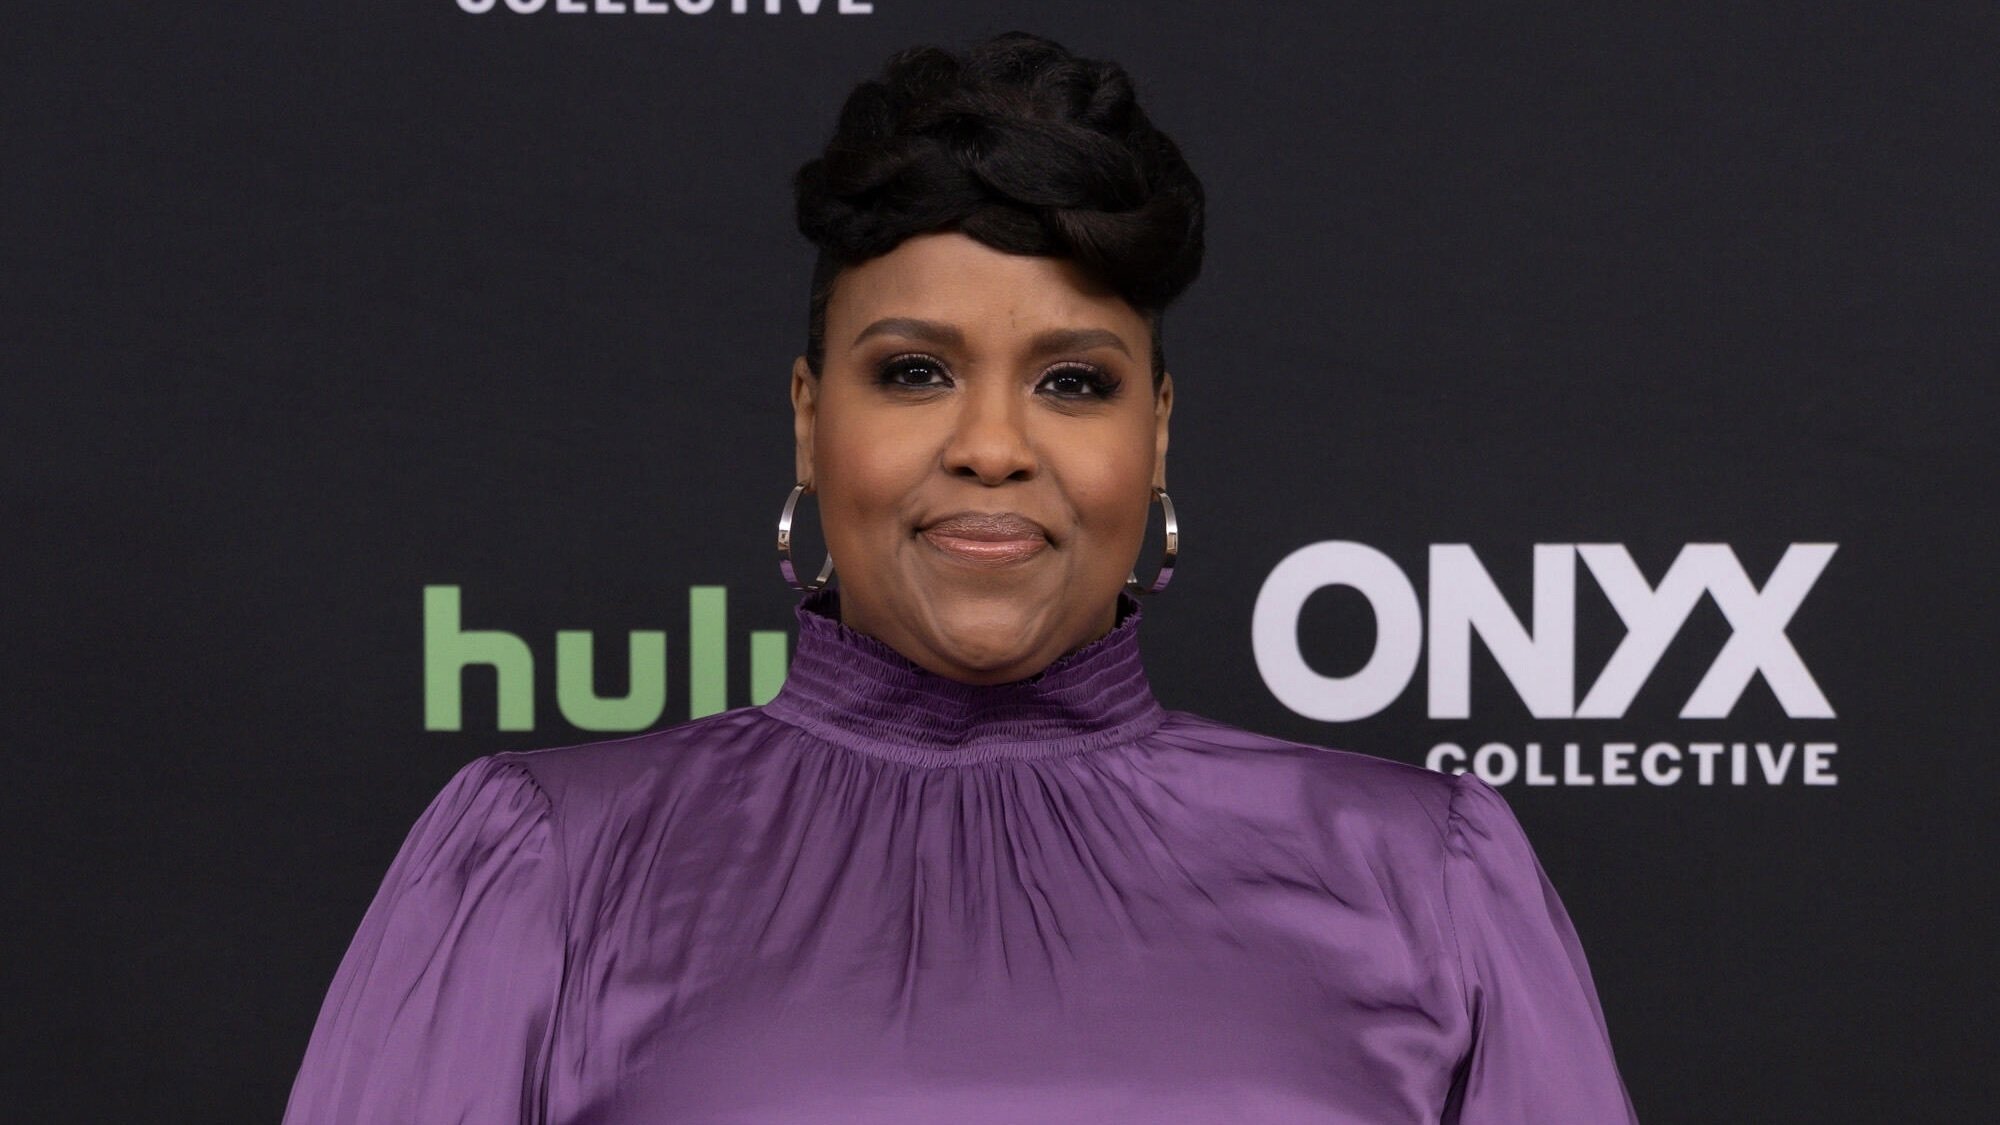 Natasha Rothwell wearing a purple dress and standing in front of a black backdrop that reads 